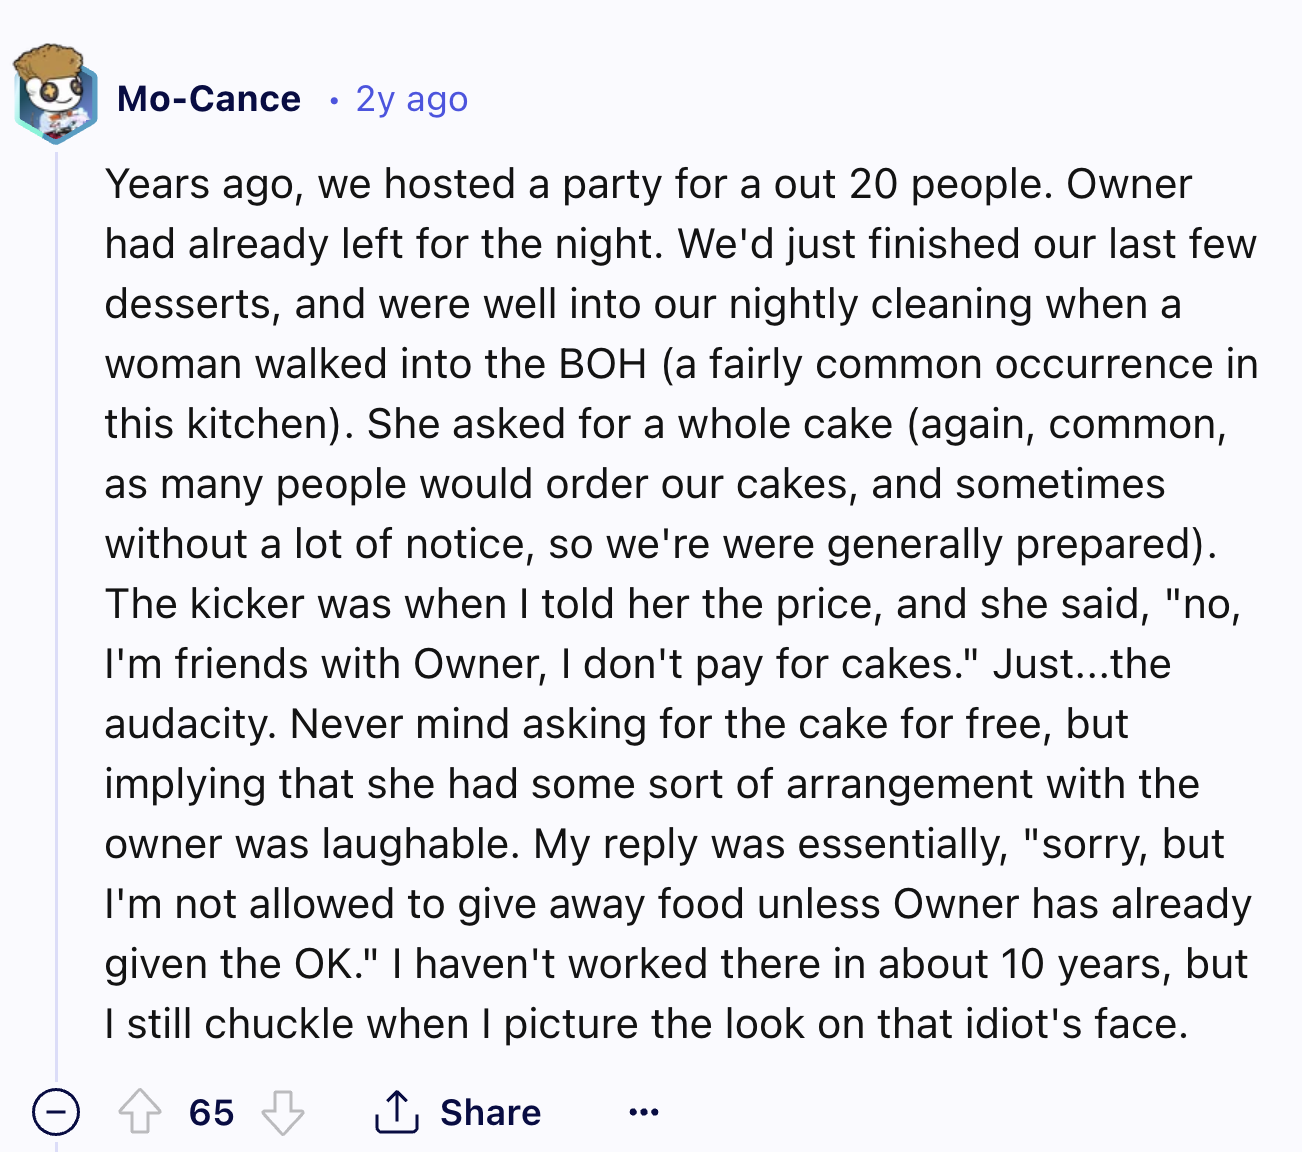 document - MoCance 2y ago Years ago, we hosted a party for a out 20 people. Owner had already left for the night. We'd just finished our last few desserts, and were well into our nightly cleaning when a woman walked into the Boh a fairly common occurrence